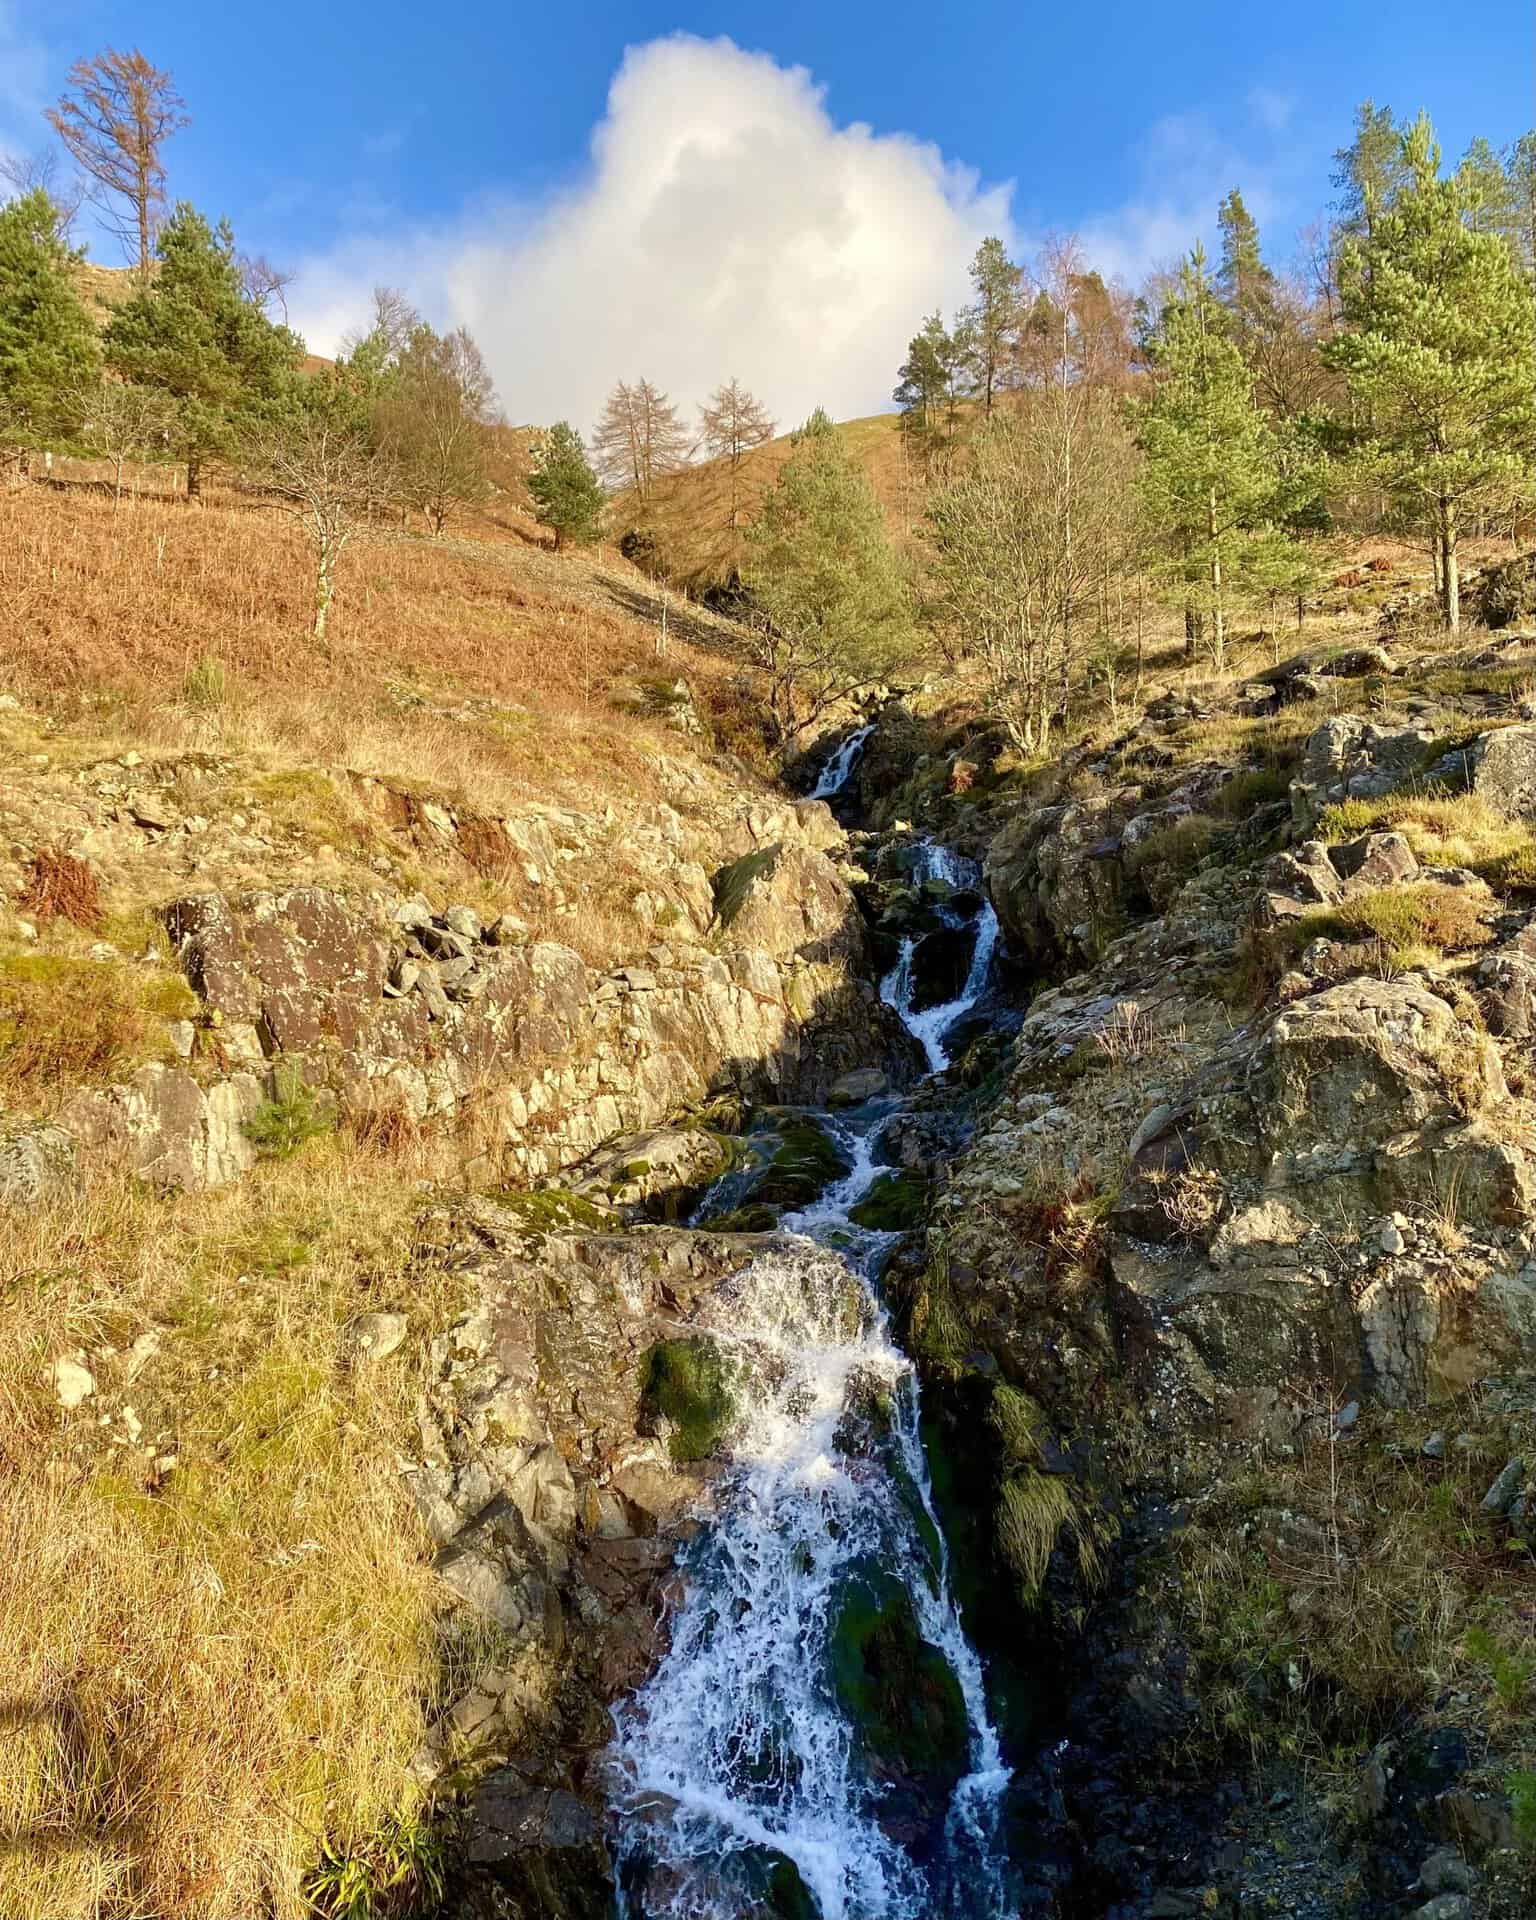 Another waterfall seen from the forestry track. This stream originates from Brownrigg Well about 80 metres below the Helvellyn summit. It cuts a channel between Helvellyn Screes and Whelp Side and empties into Thirlmere.